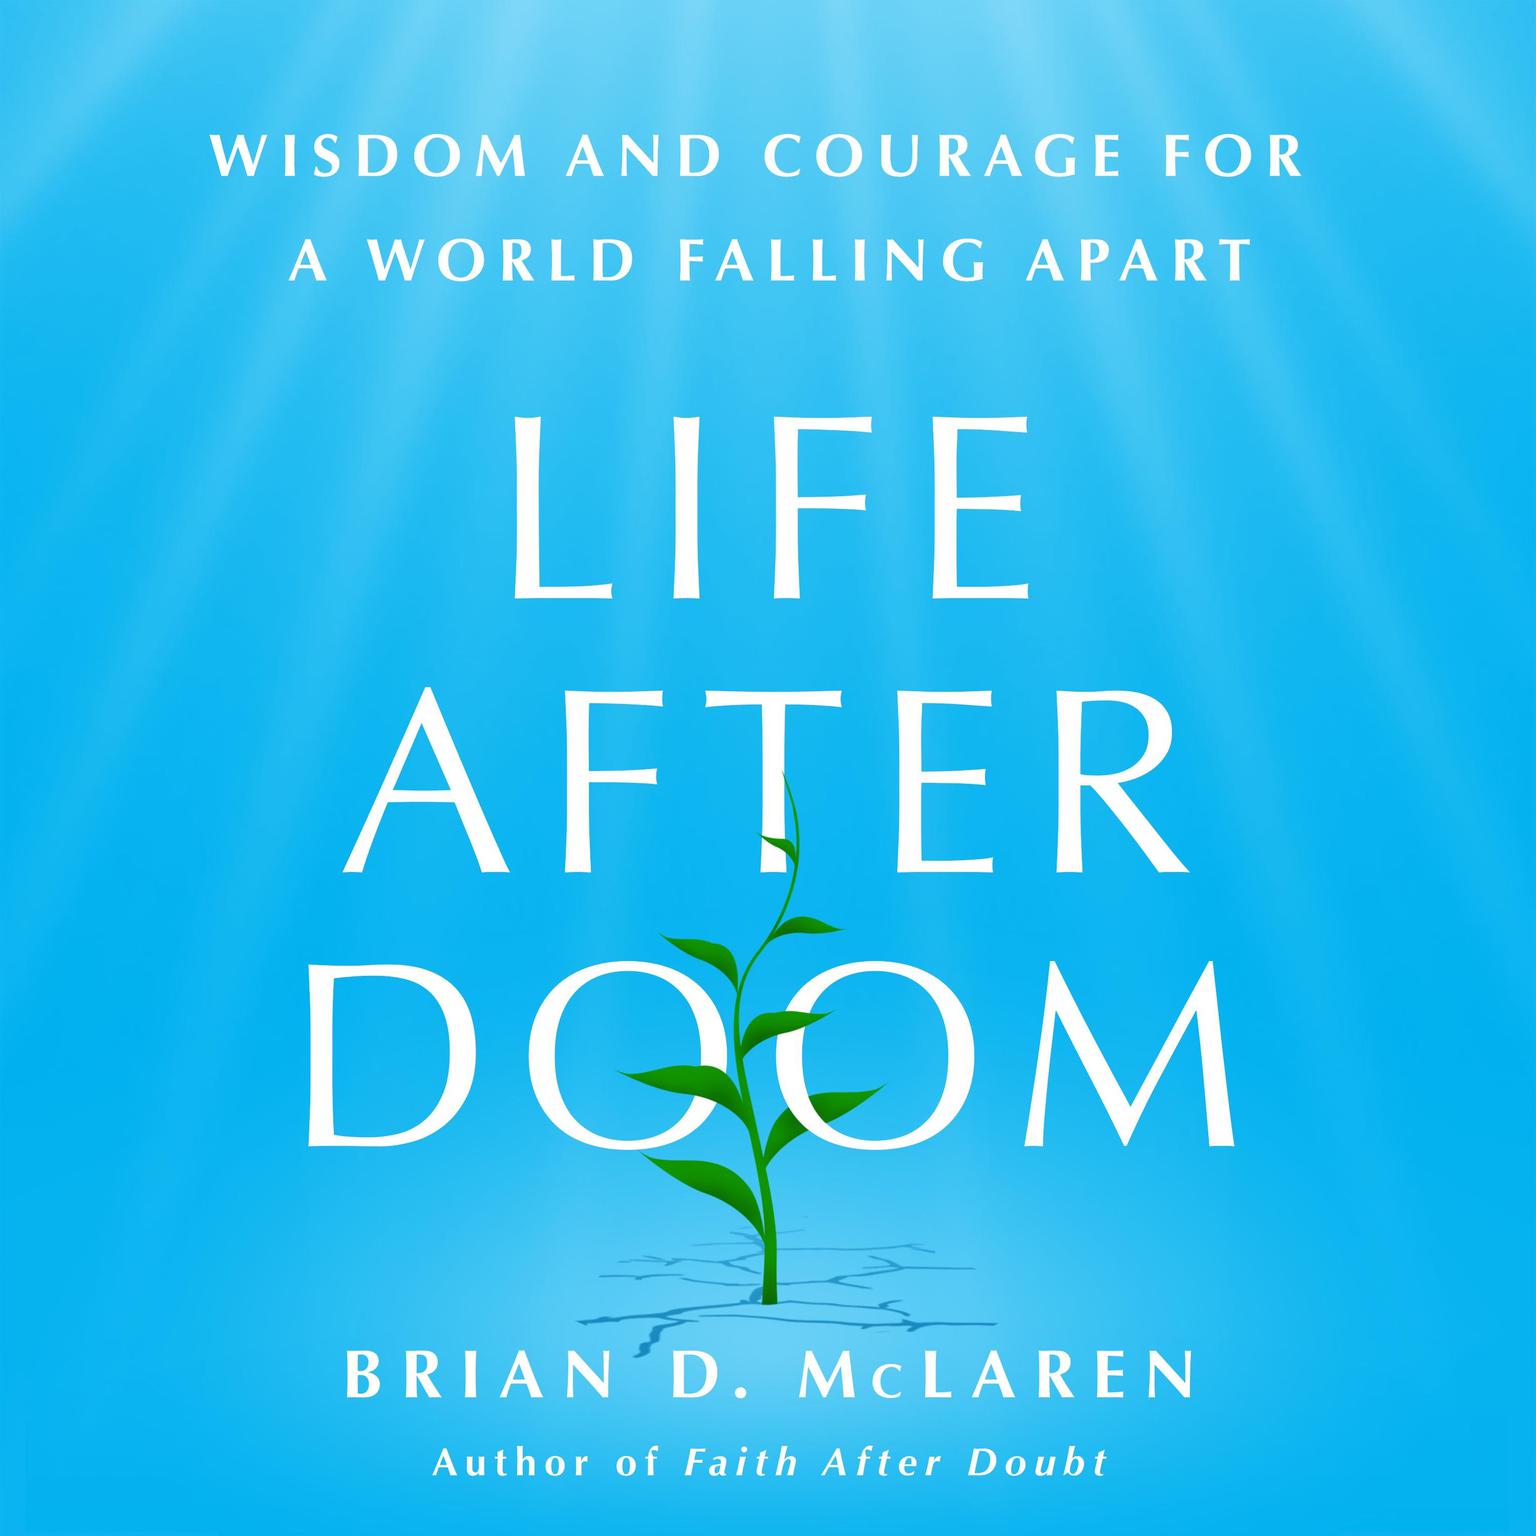 Life After Doom: Wisdom and Courage for a World Falling Apart Audiobook, by Brian D. McLaren